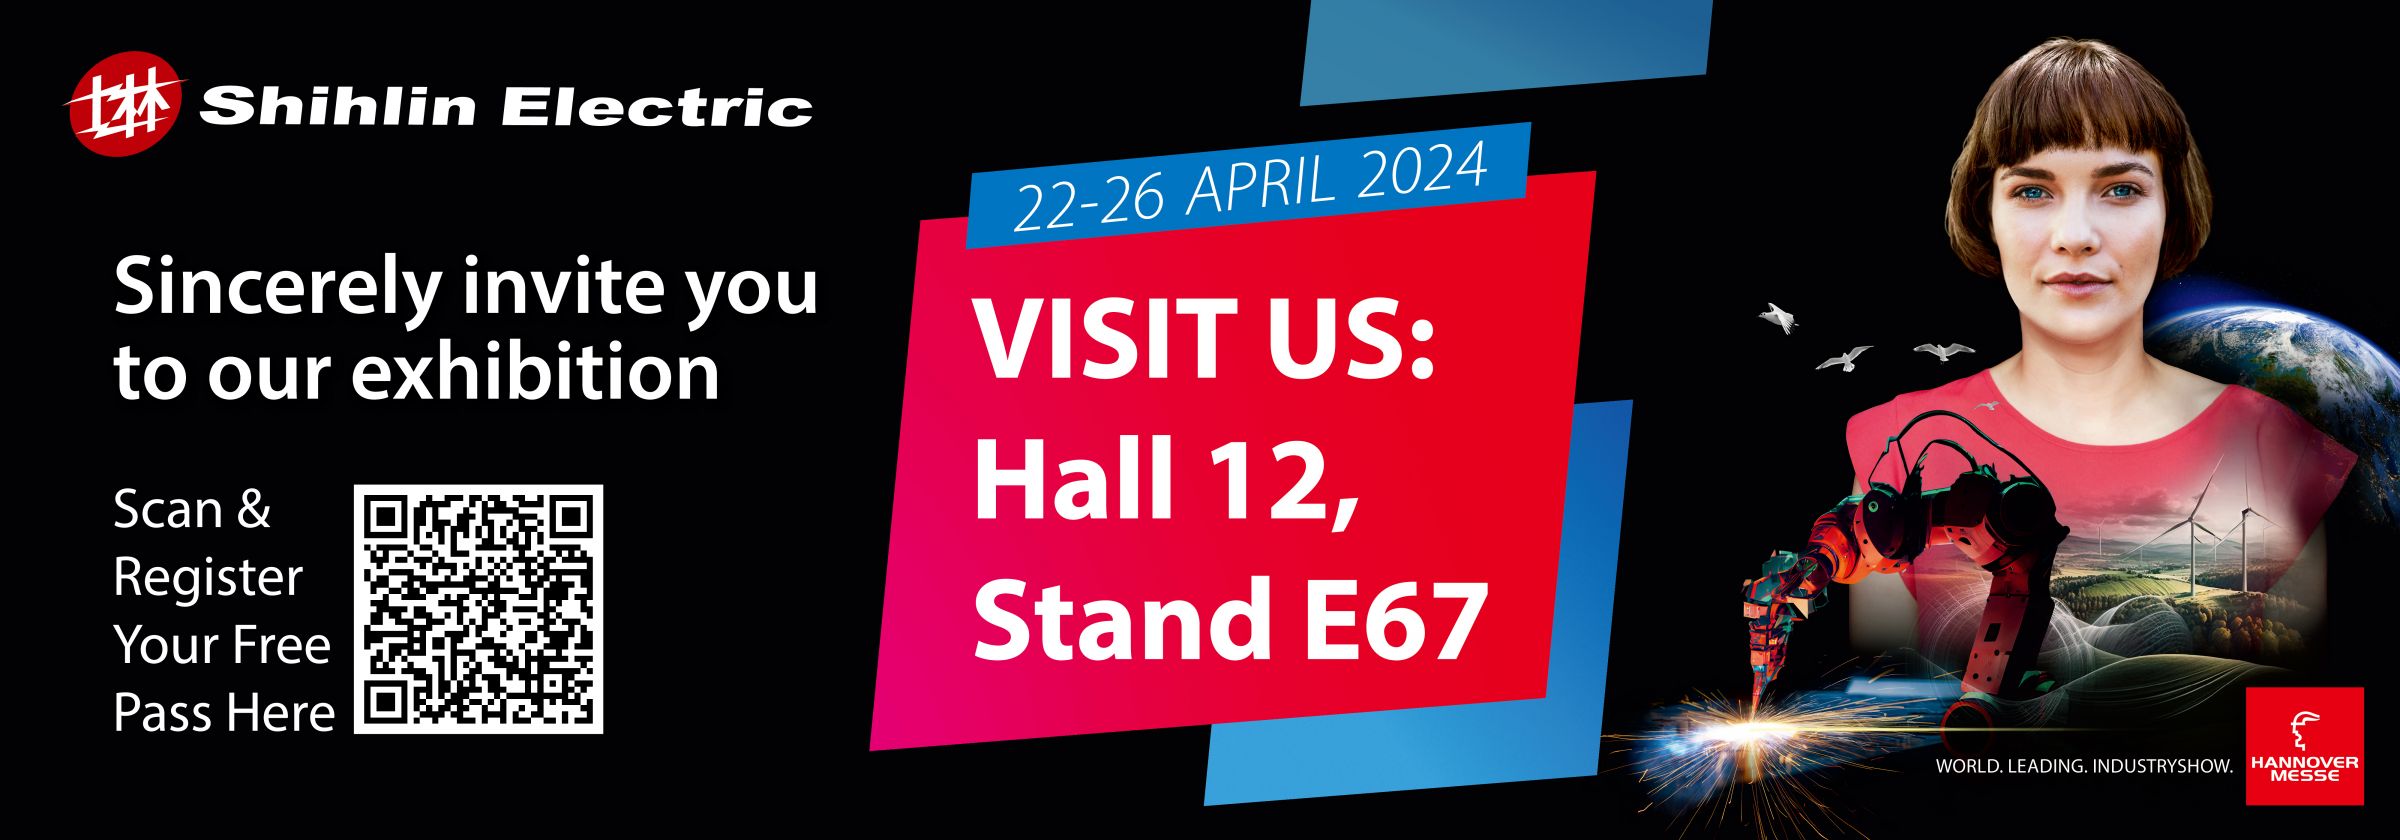 Hội chợ Hannover Messe 2024